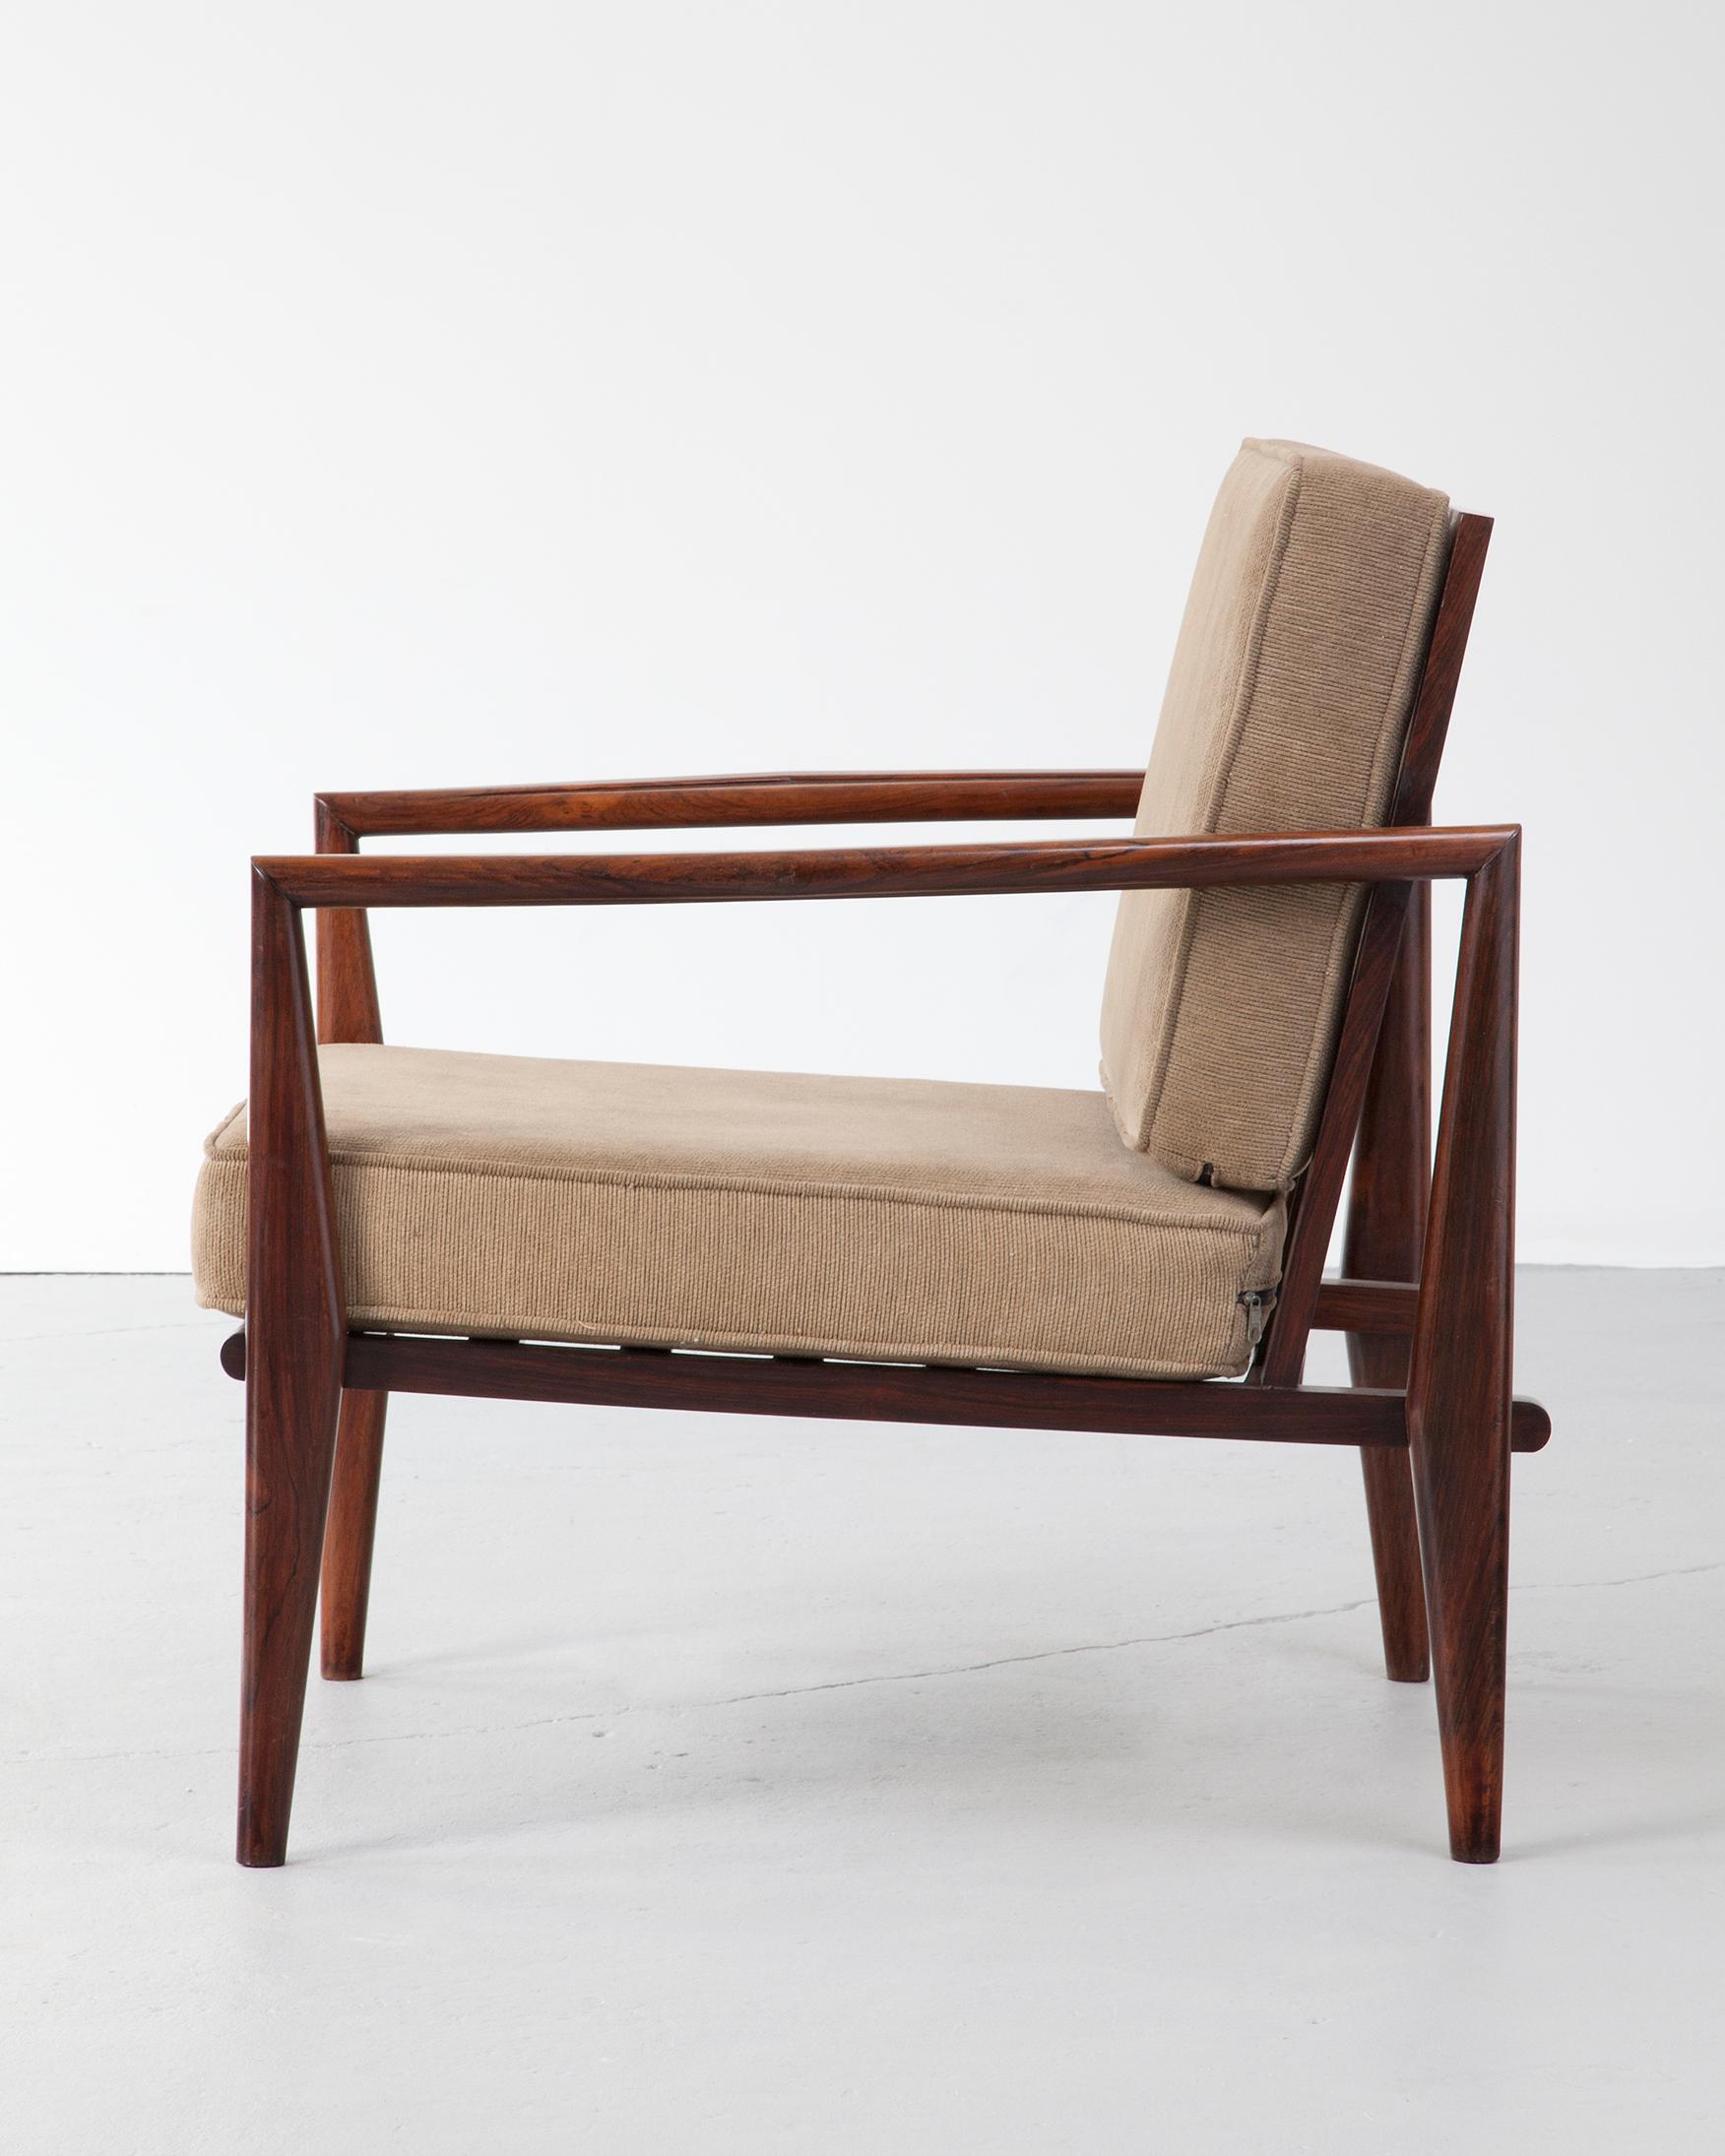 Modern Lounge Chair in Rosewood with Beige Upholstery by Fatima, circa 1960